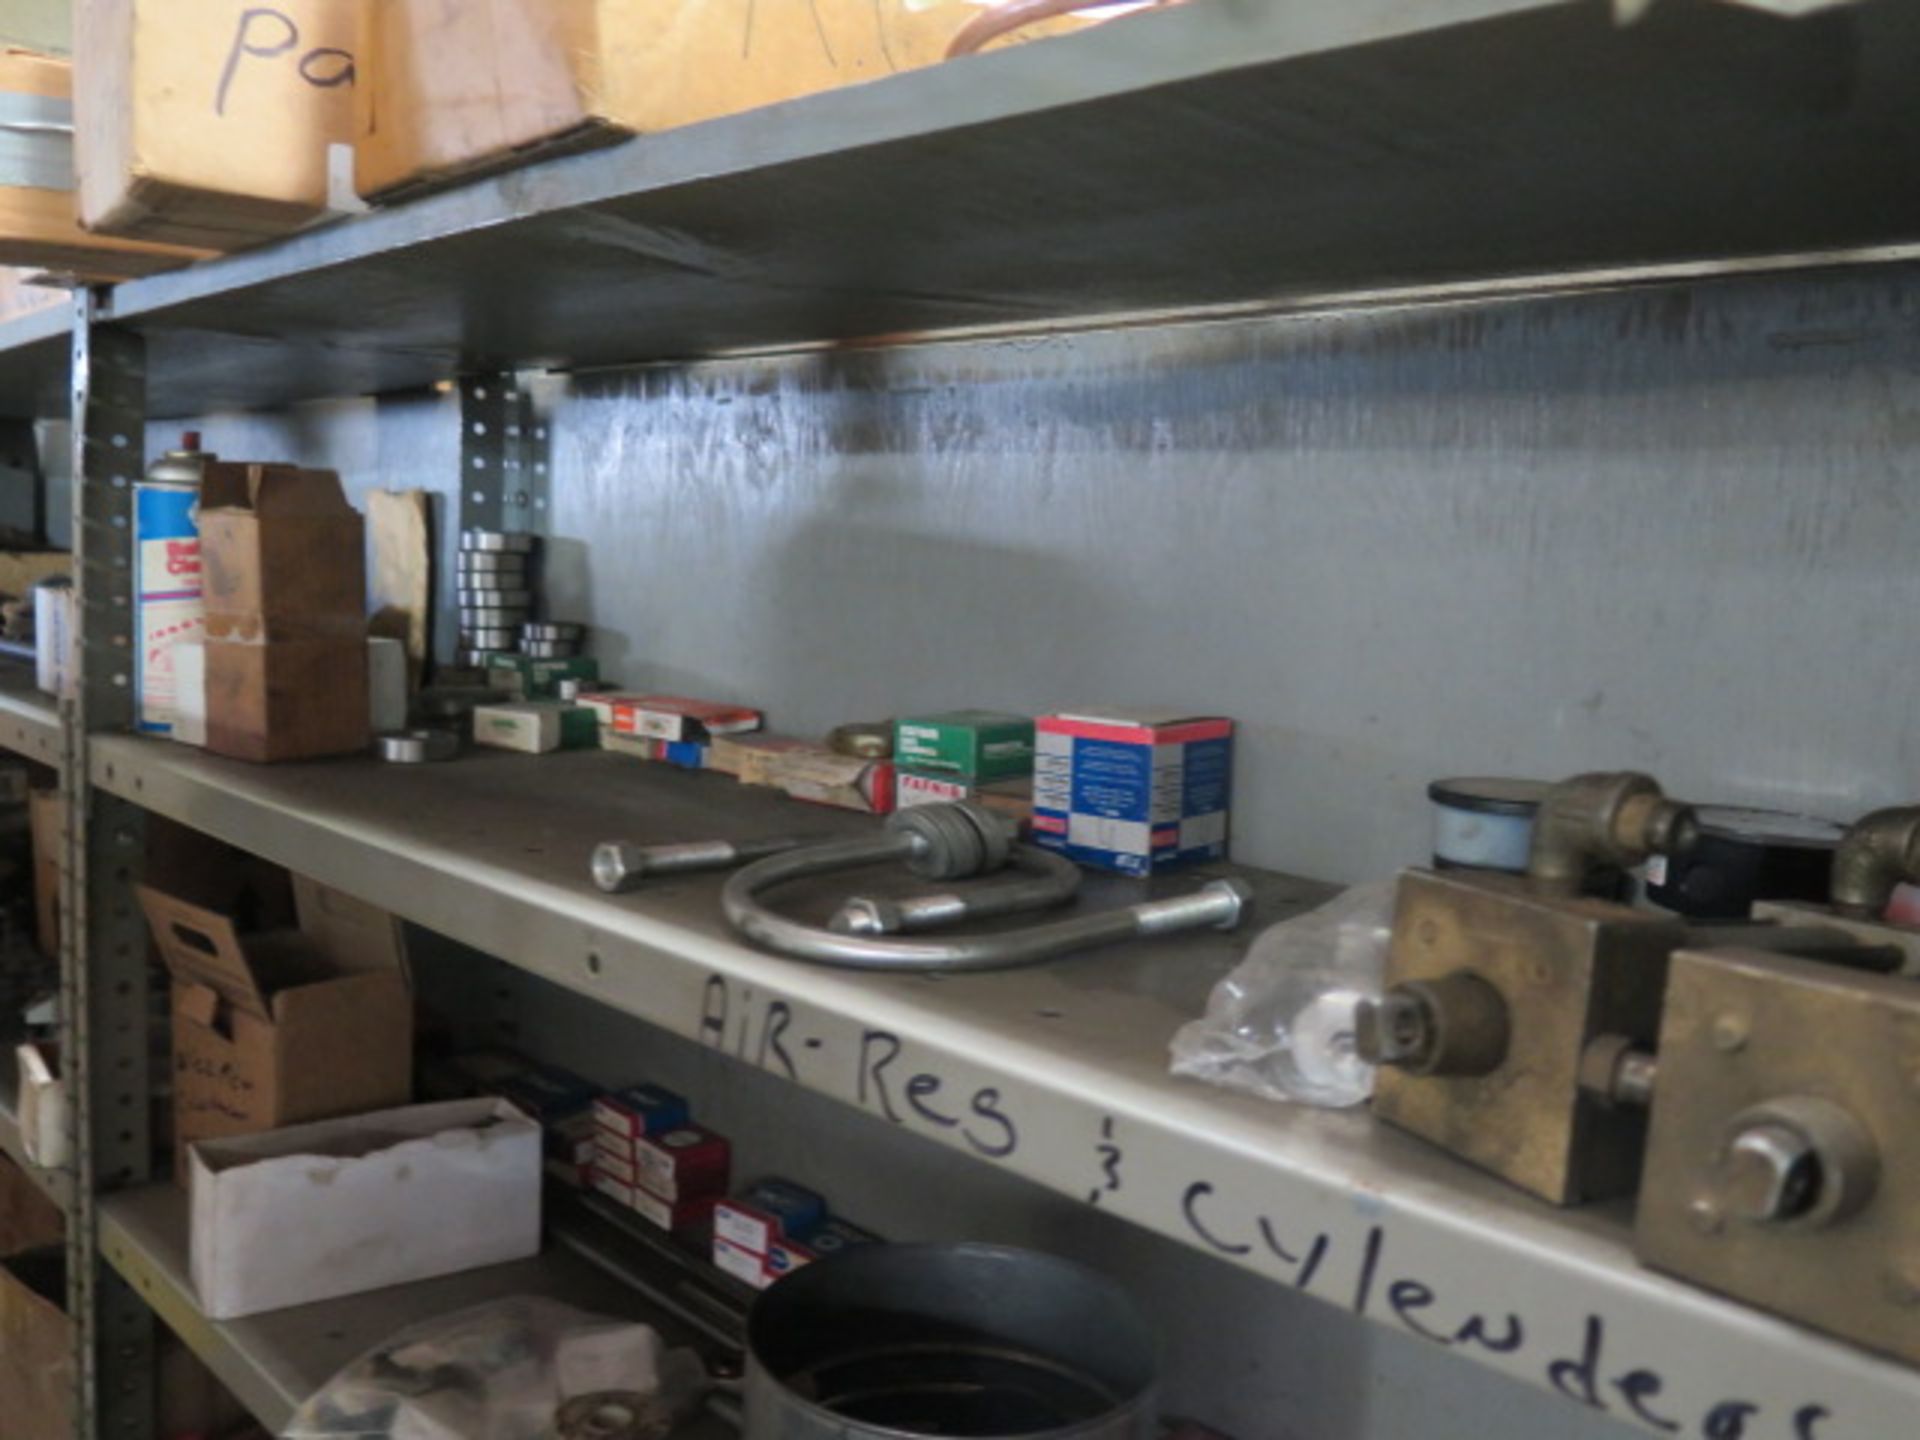 Contents of Maintenance Area, Repair Parts, Electrical, Shop Supplies, Tables, Cabinets and - Image 2 of 20